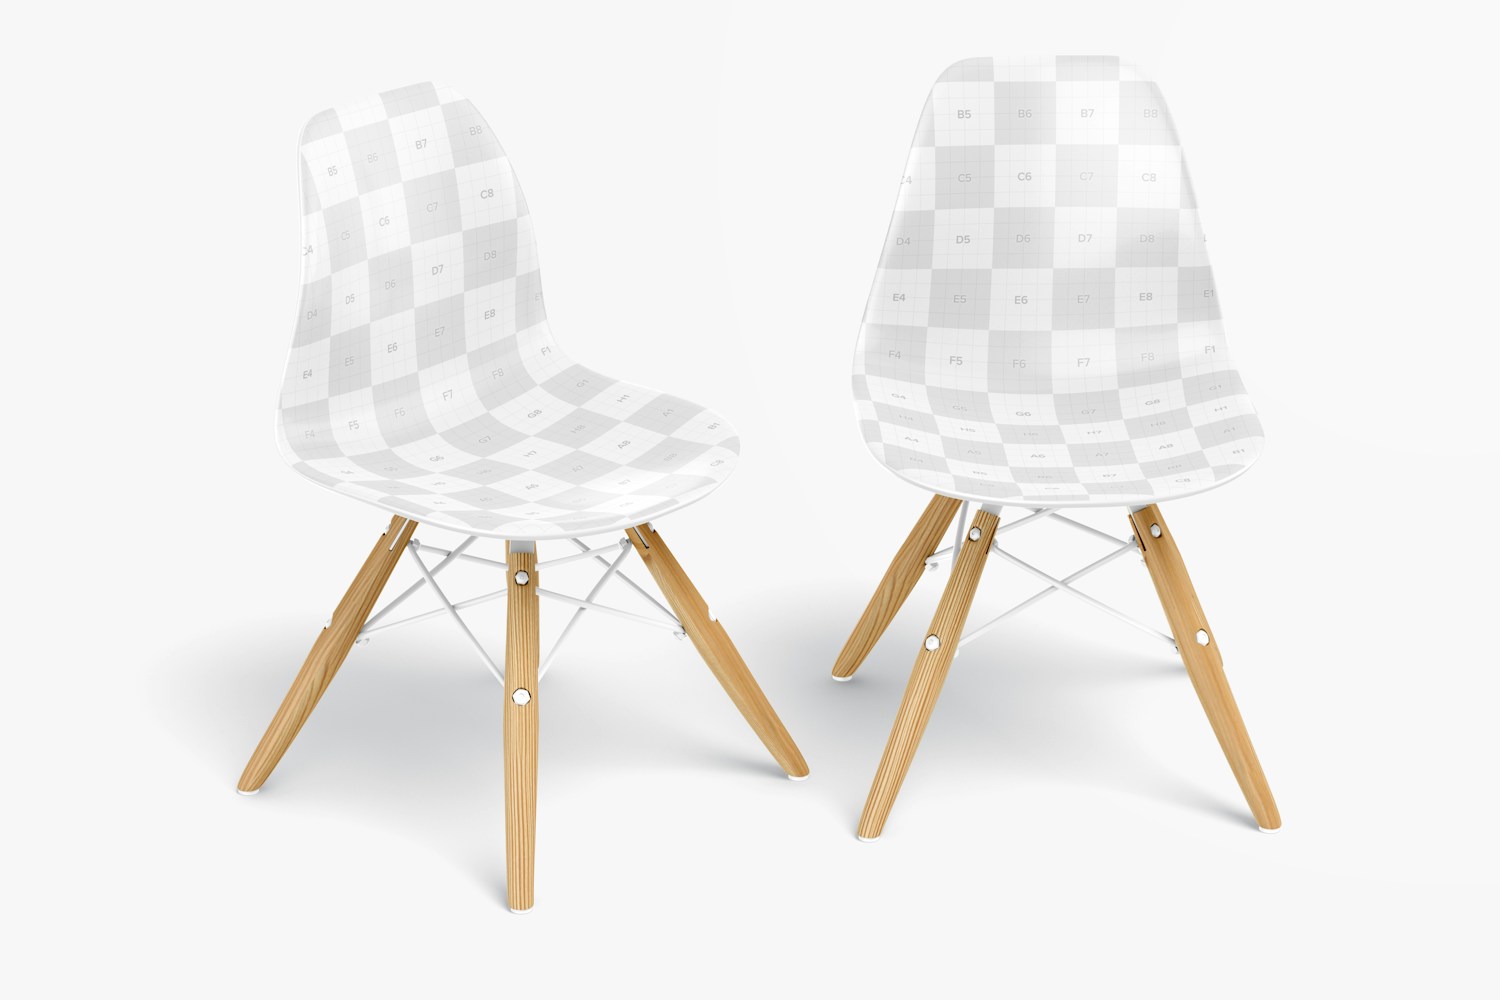 Modern Plastic Kids Chairs Mockup, Left and Front View